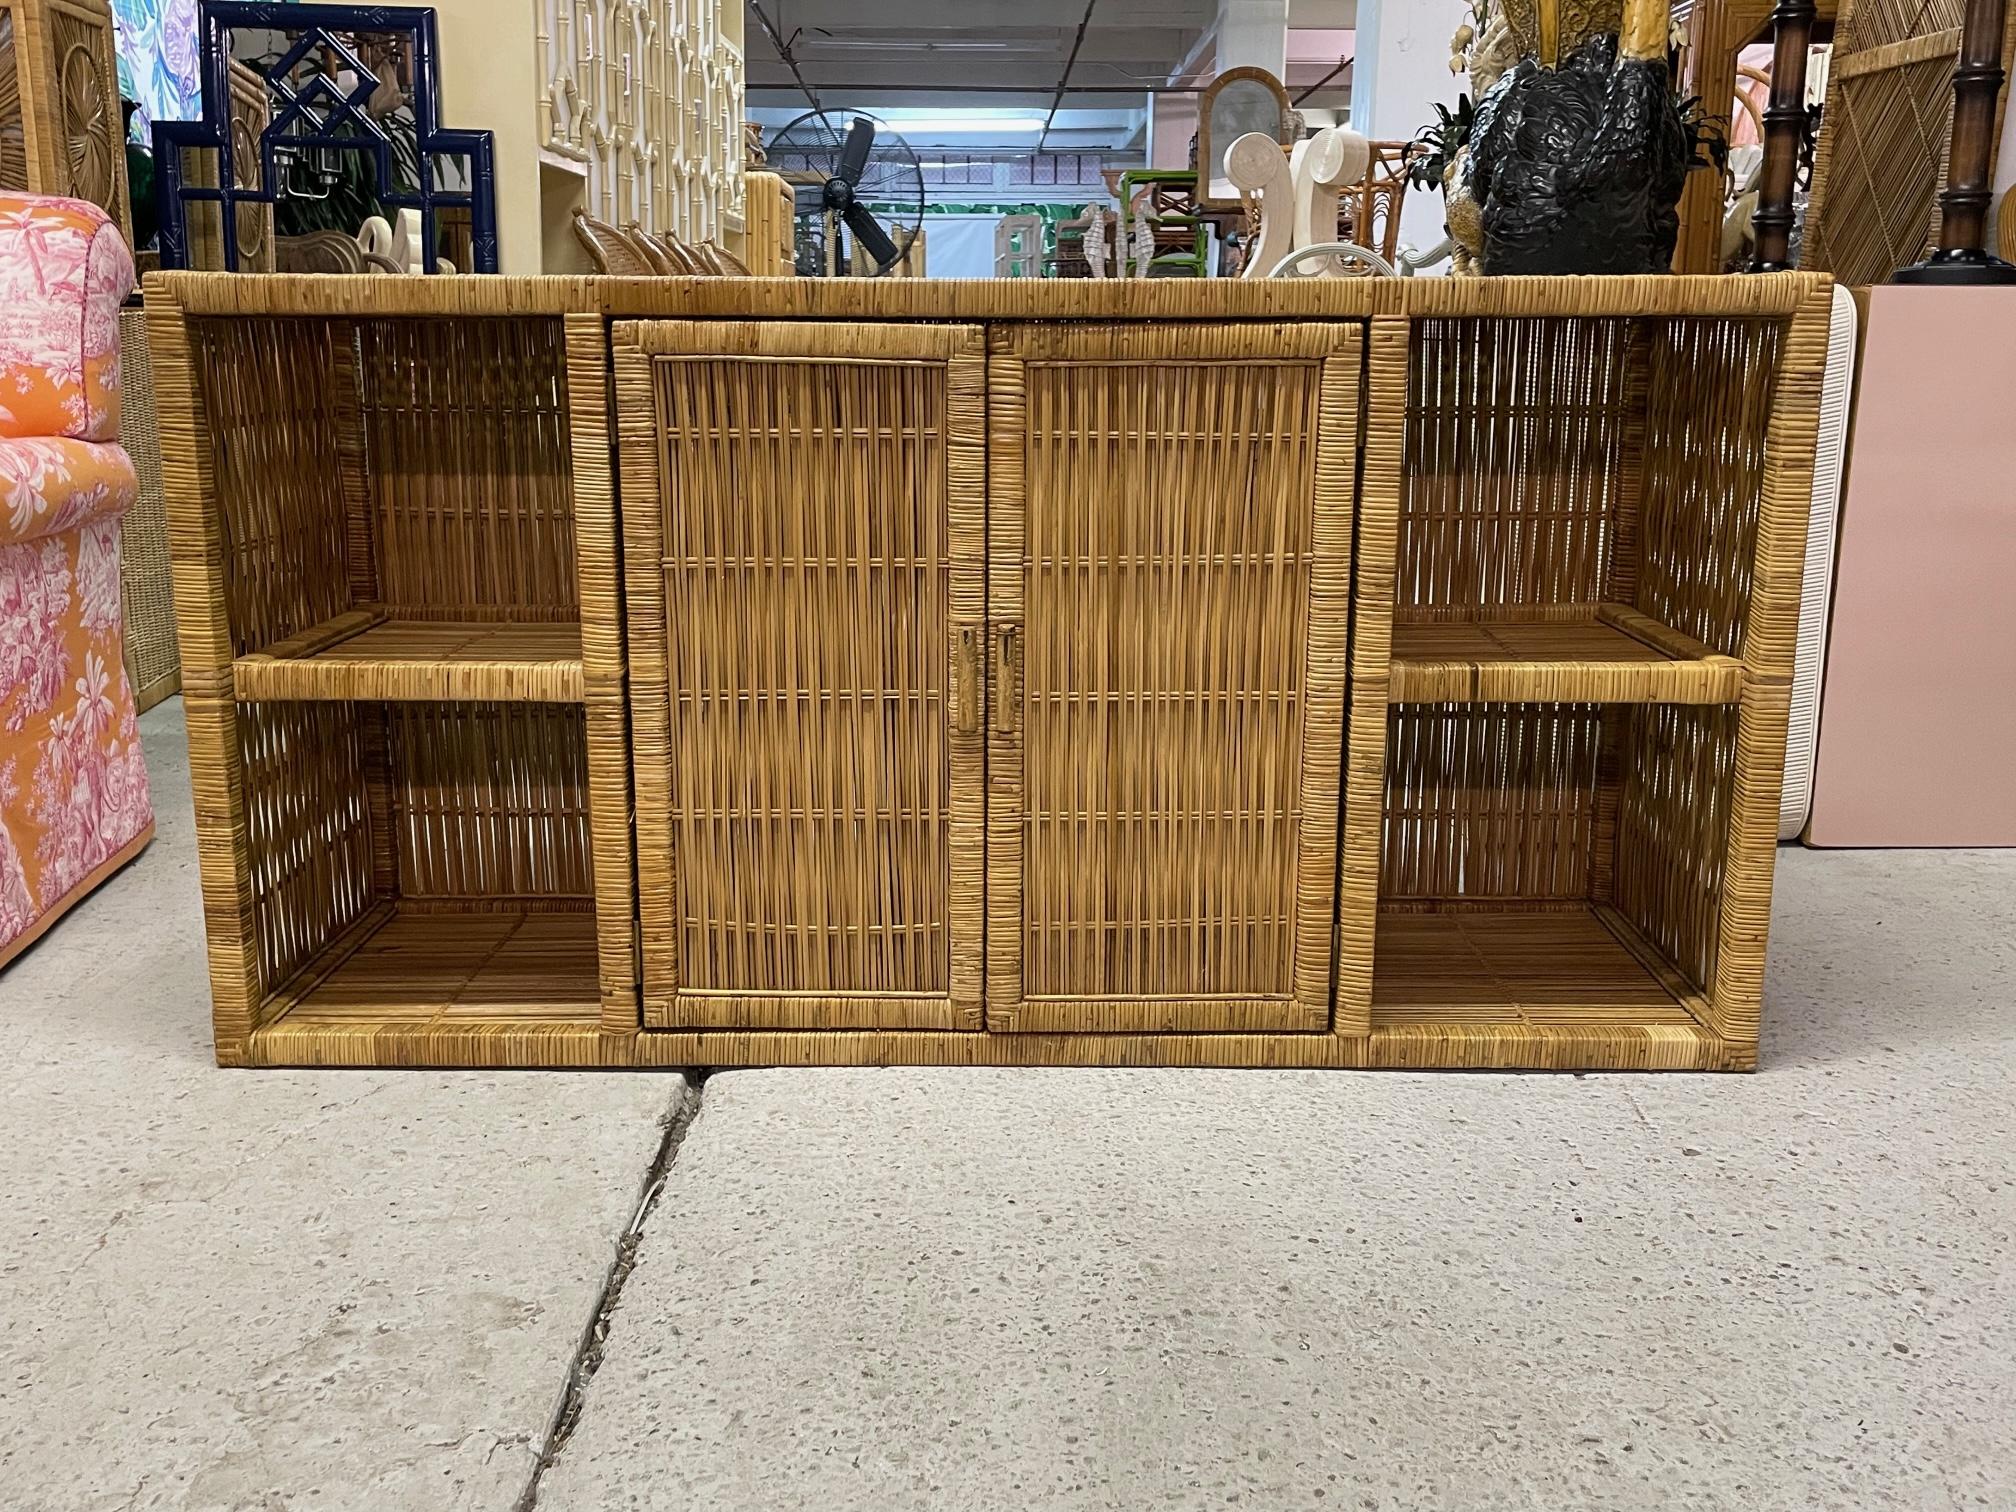 Vintage credenza or buffet feature a woven wicker design with double doors, shelving for display, and a smoked glass top. Good condition with imperfections consistent with age (see photos).
Shipping to most of the continental US is $250 to $500